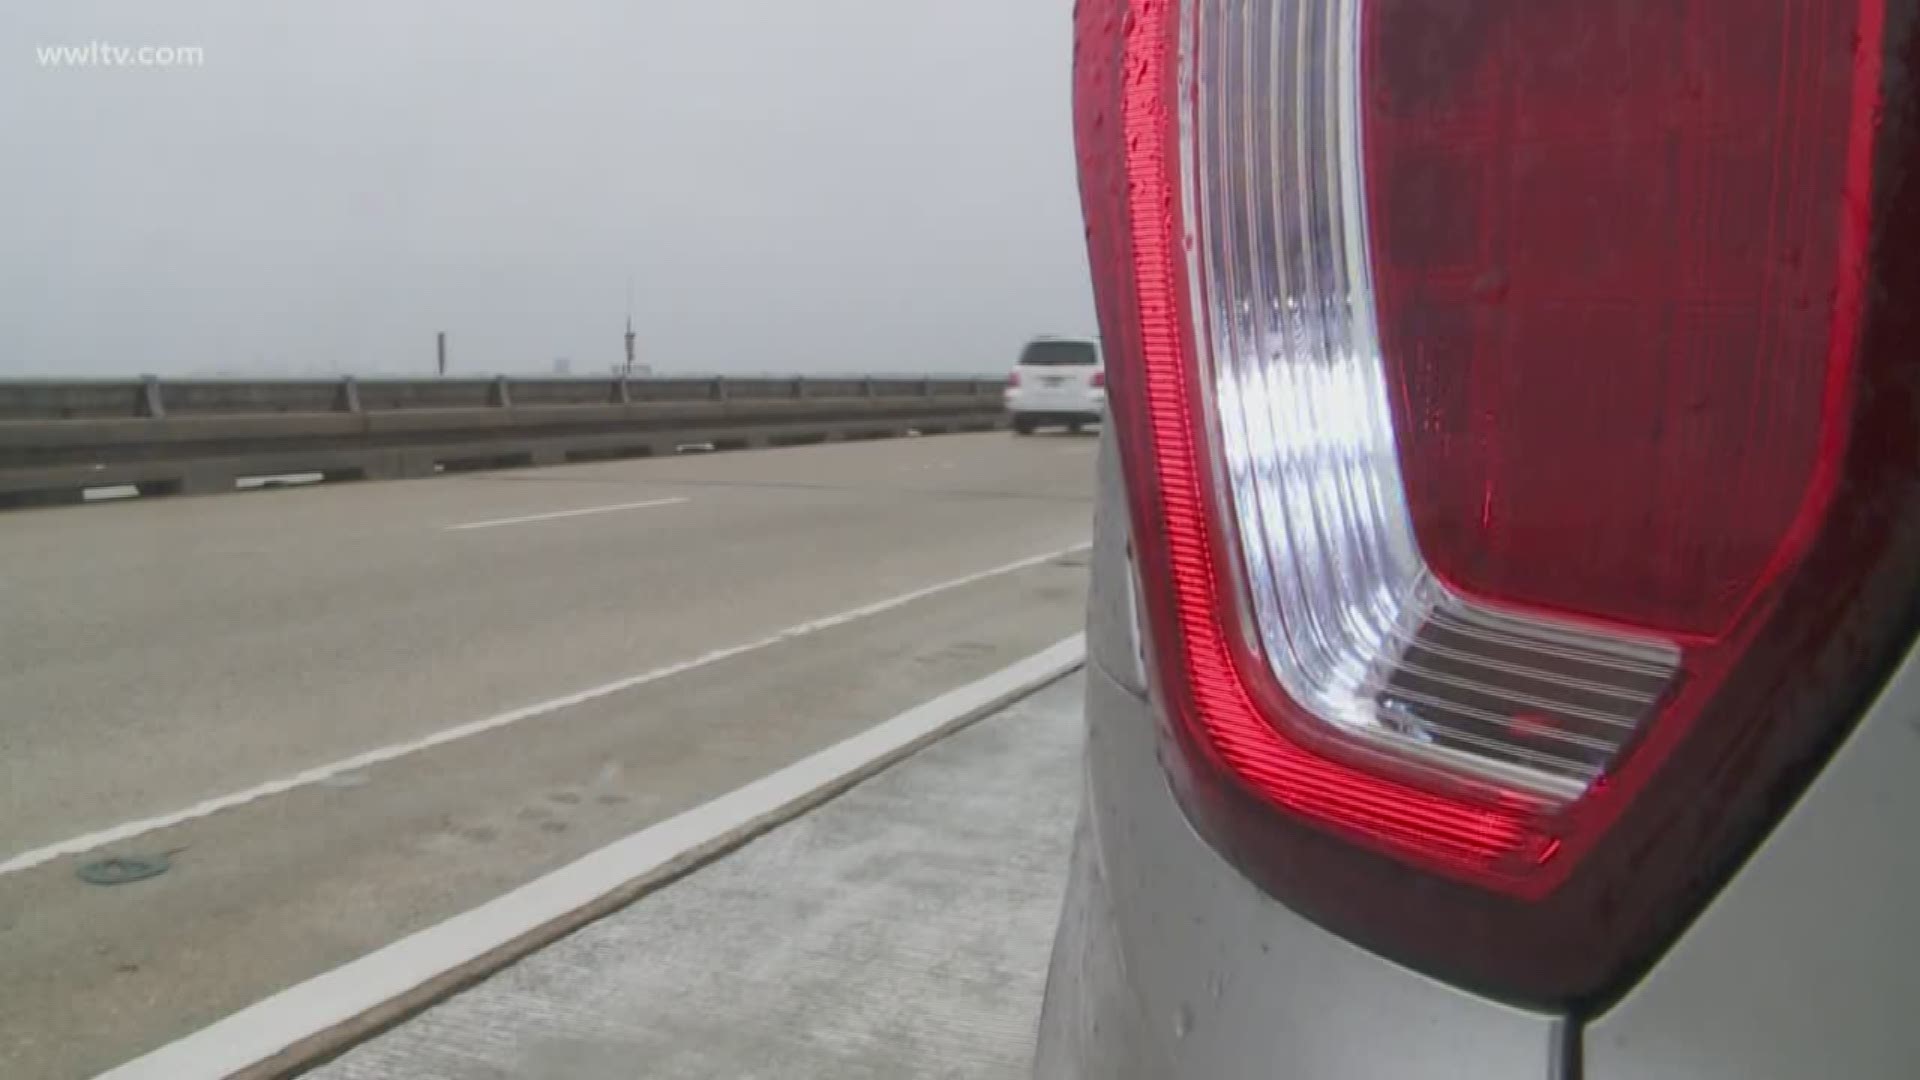 Meg Farris talked to the Causeway general manager about what you should do if your vehicle has problems or breaks down on the nearly 24-mile span.